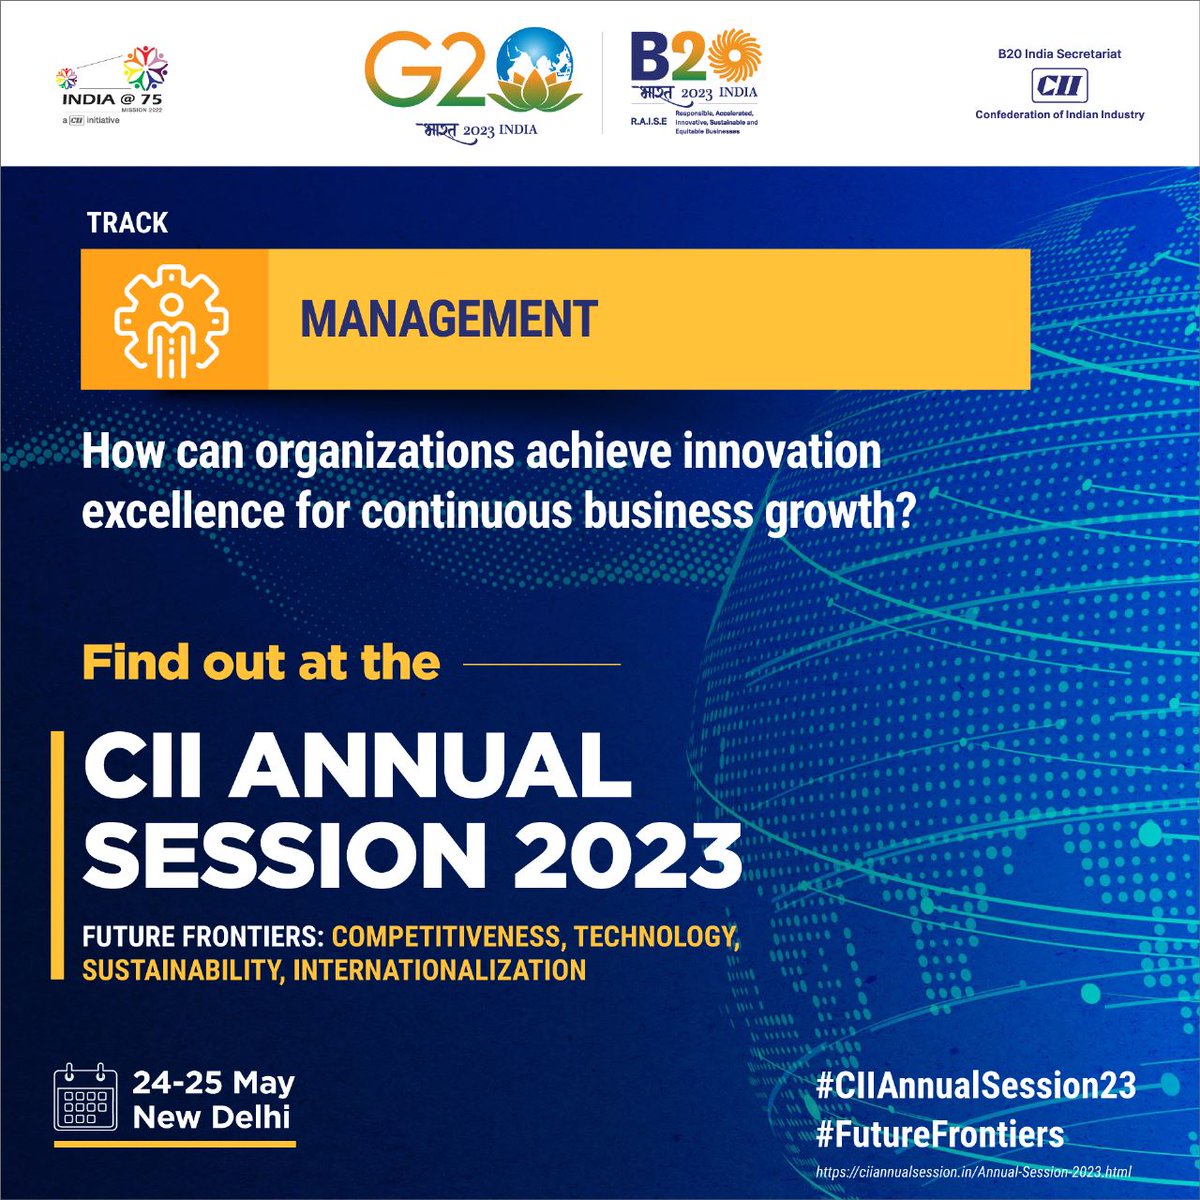 What are the key actions, processes & practices for enterprise executives to build a strong corporate innovation system for continuous growth & strategic renewal? 
Find out at the #CIIAnnualSession23!
Visit➡ciiannualsession.in/index.html
#FutureFrontiers #technology #Sustainability…